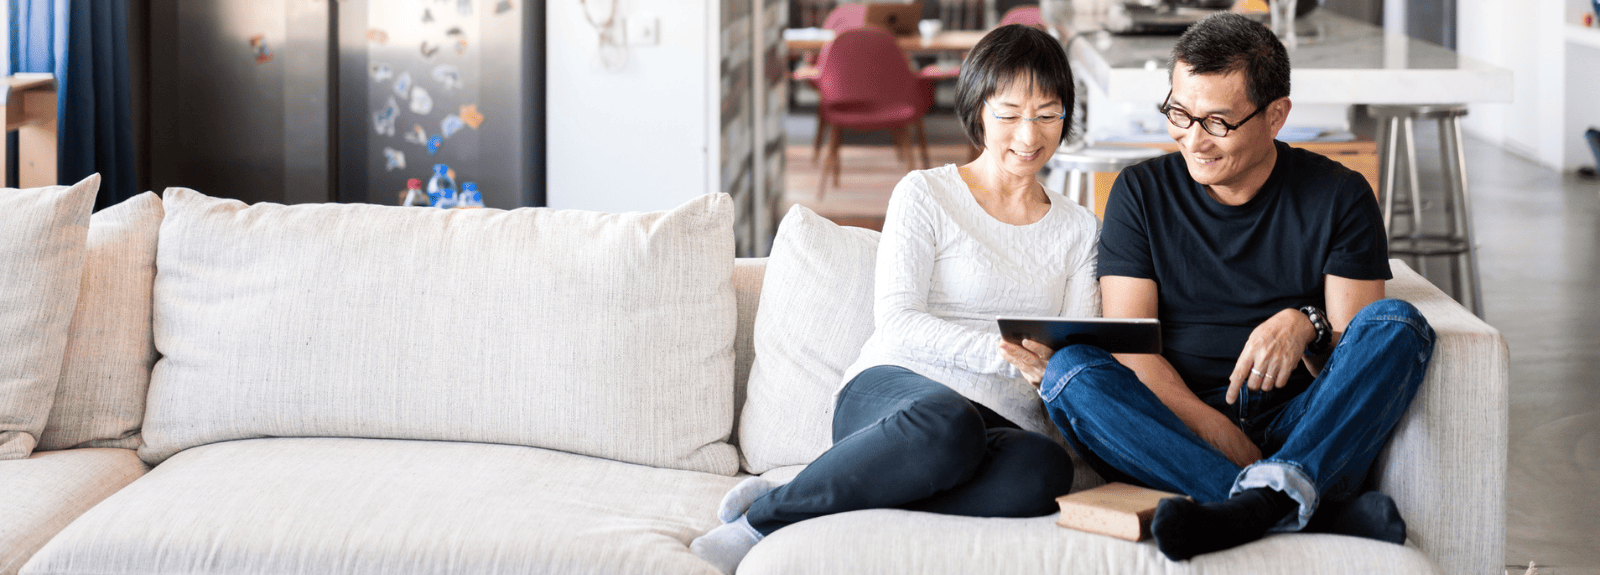 Man and woman sitting on couch reading tablet